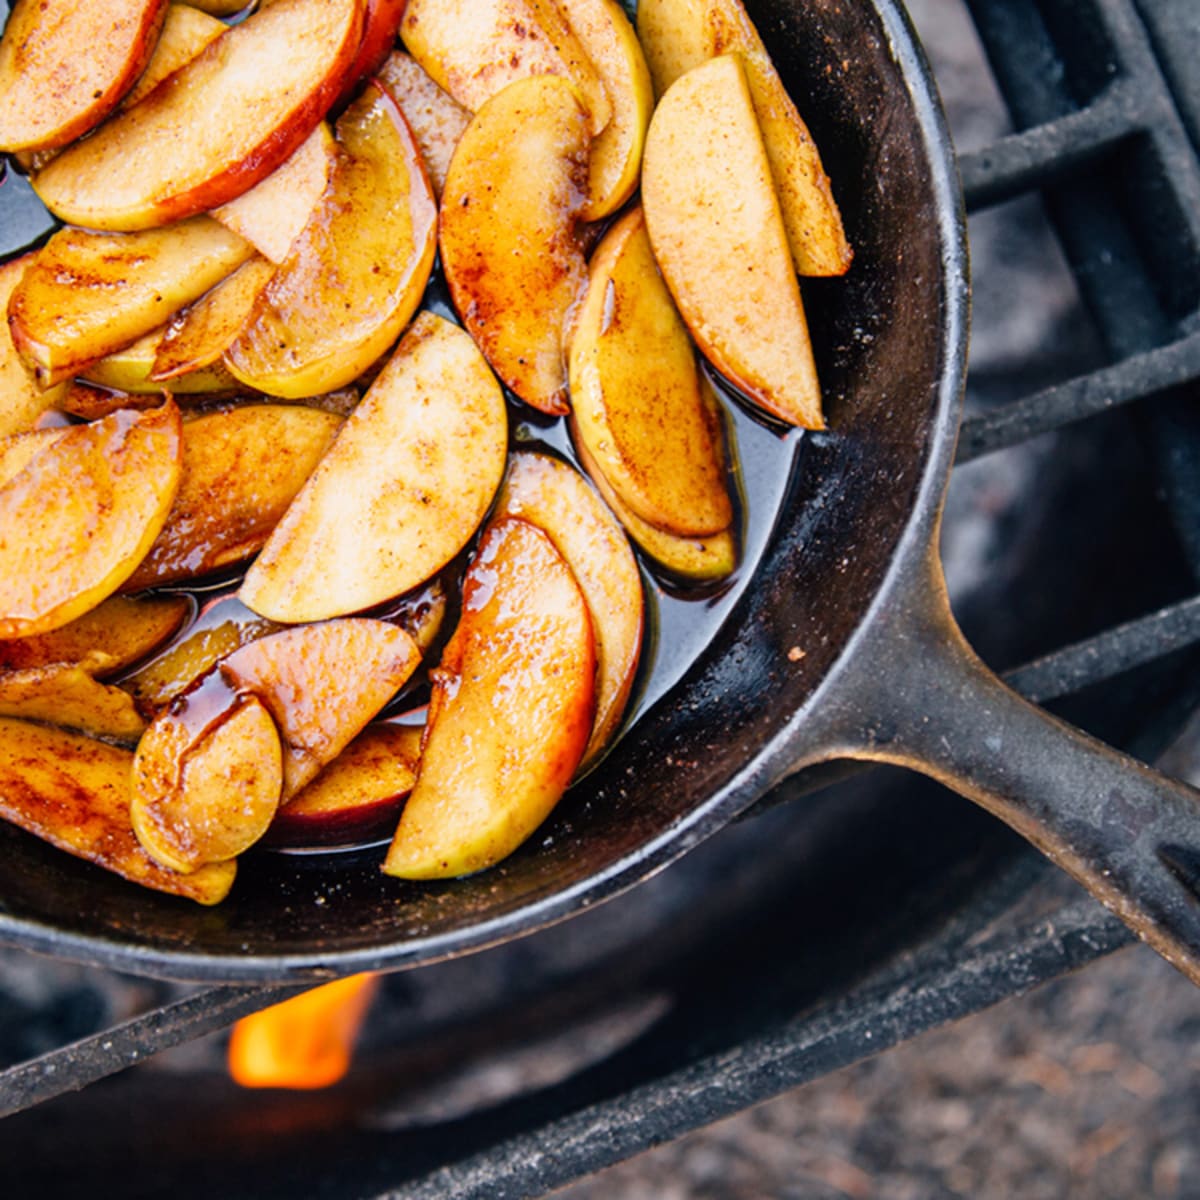 4 Easy Steps to Get Your Cast-Iron Skillet Ready for Camp Cooking